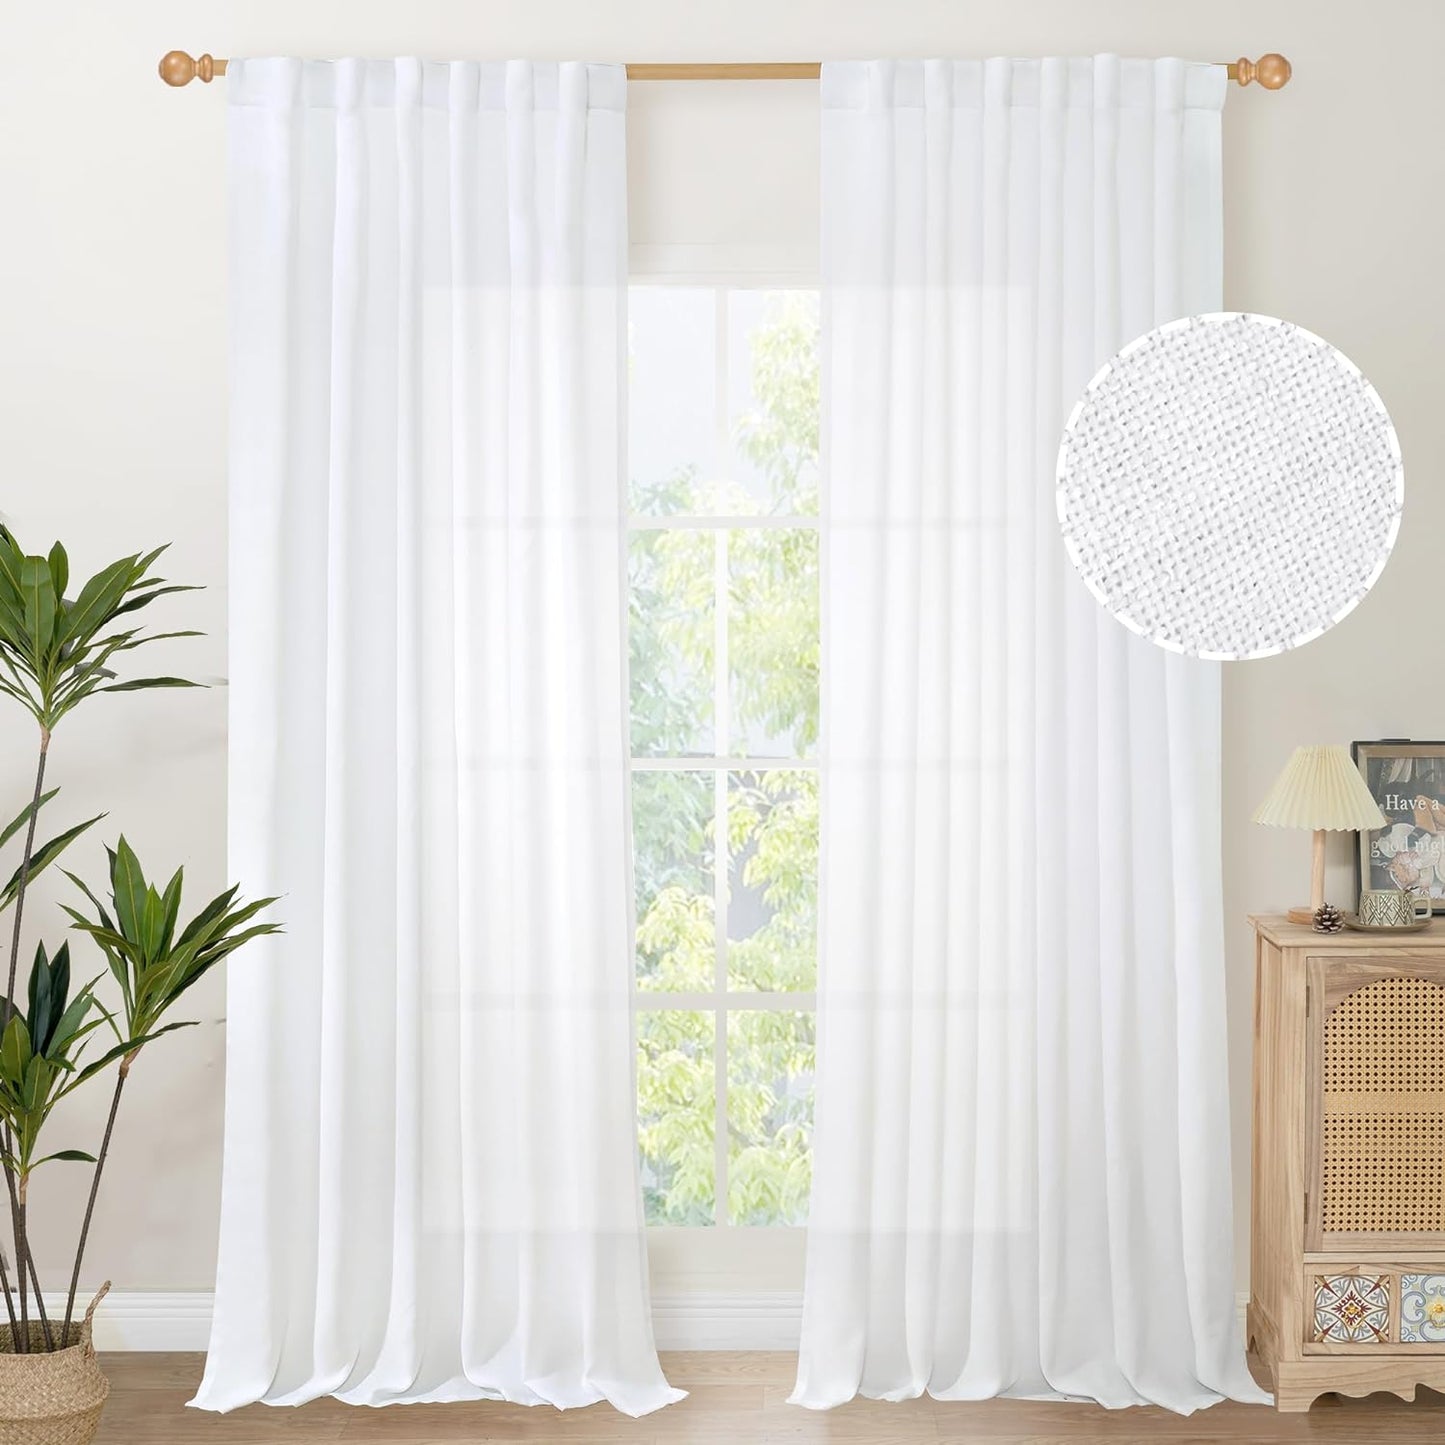 Youngstex Natural Linen Curtains 72 Inch Length 2 Panels for Living Room Light Filtering Textured Window Drapes for Bedroom Dining Office Back Tab Rod Pocket, 52 X 72 Inch  YoungsTex White 52W X 95L 